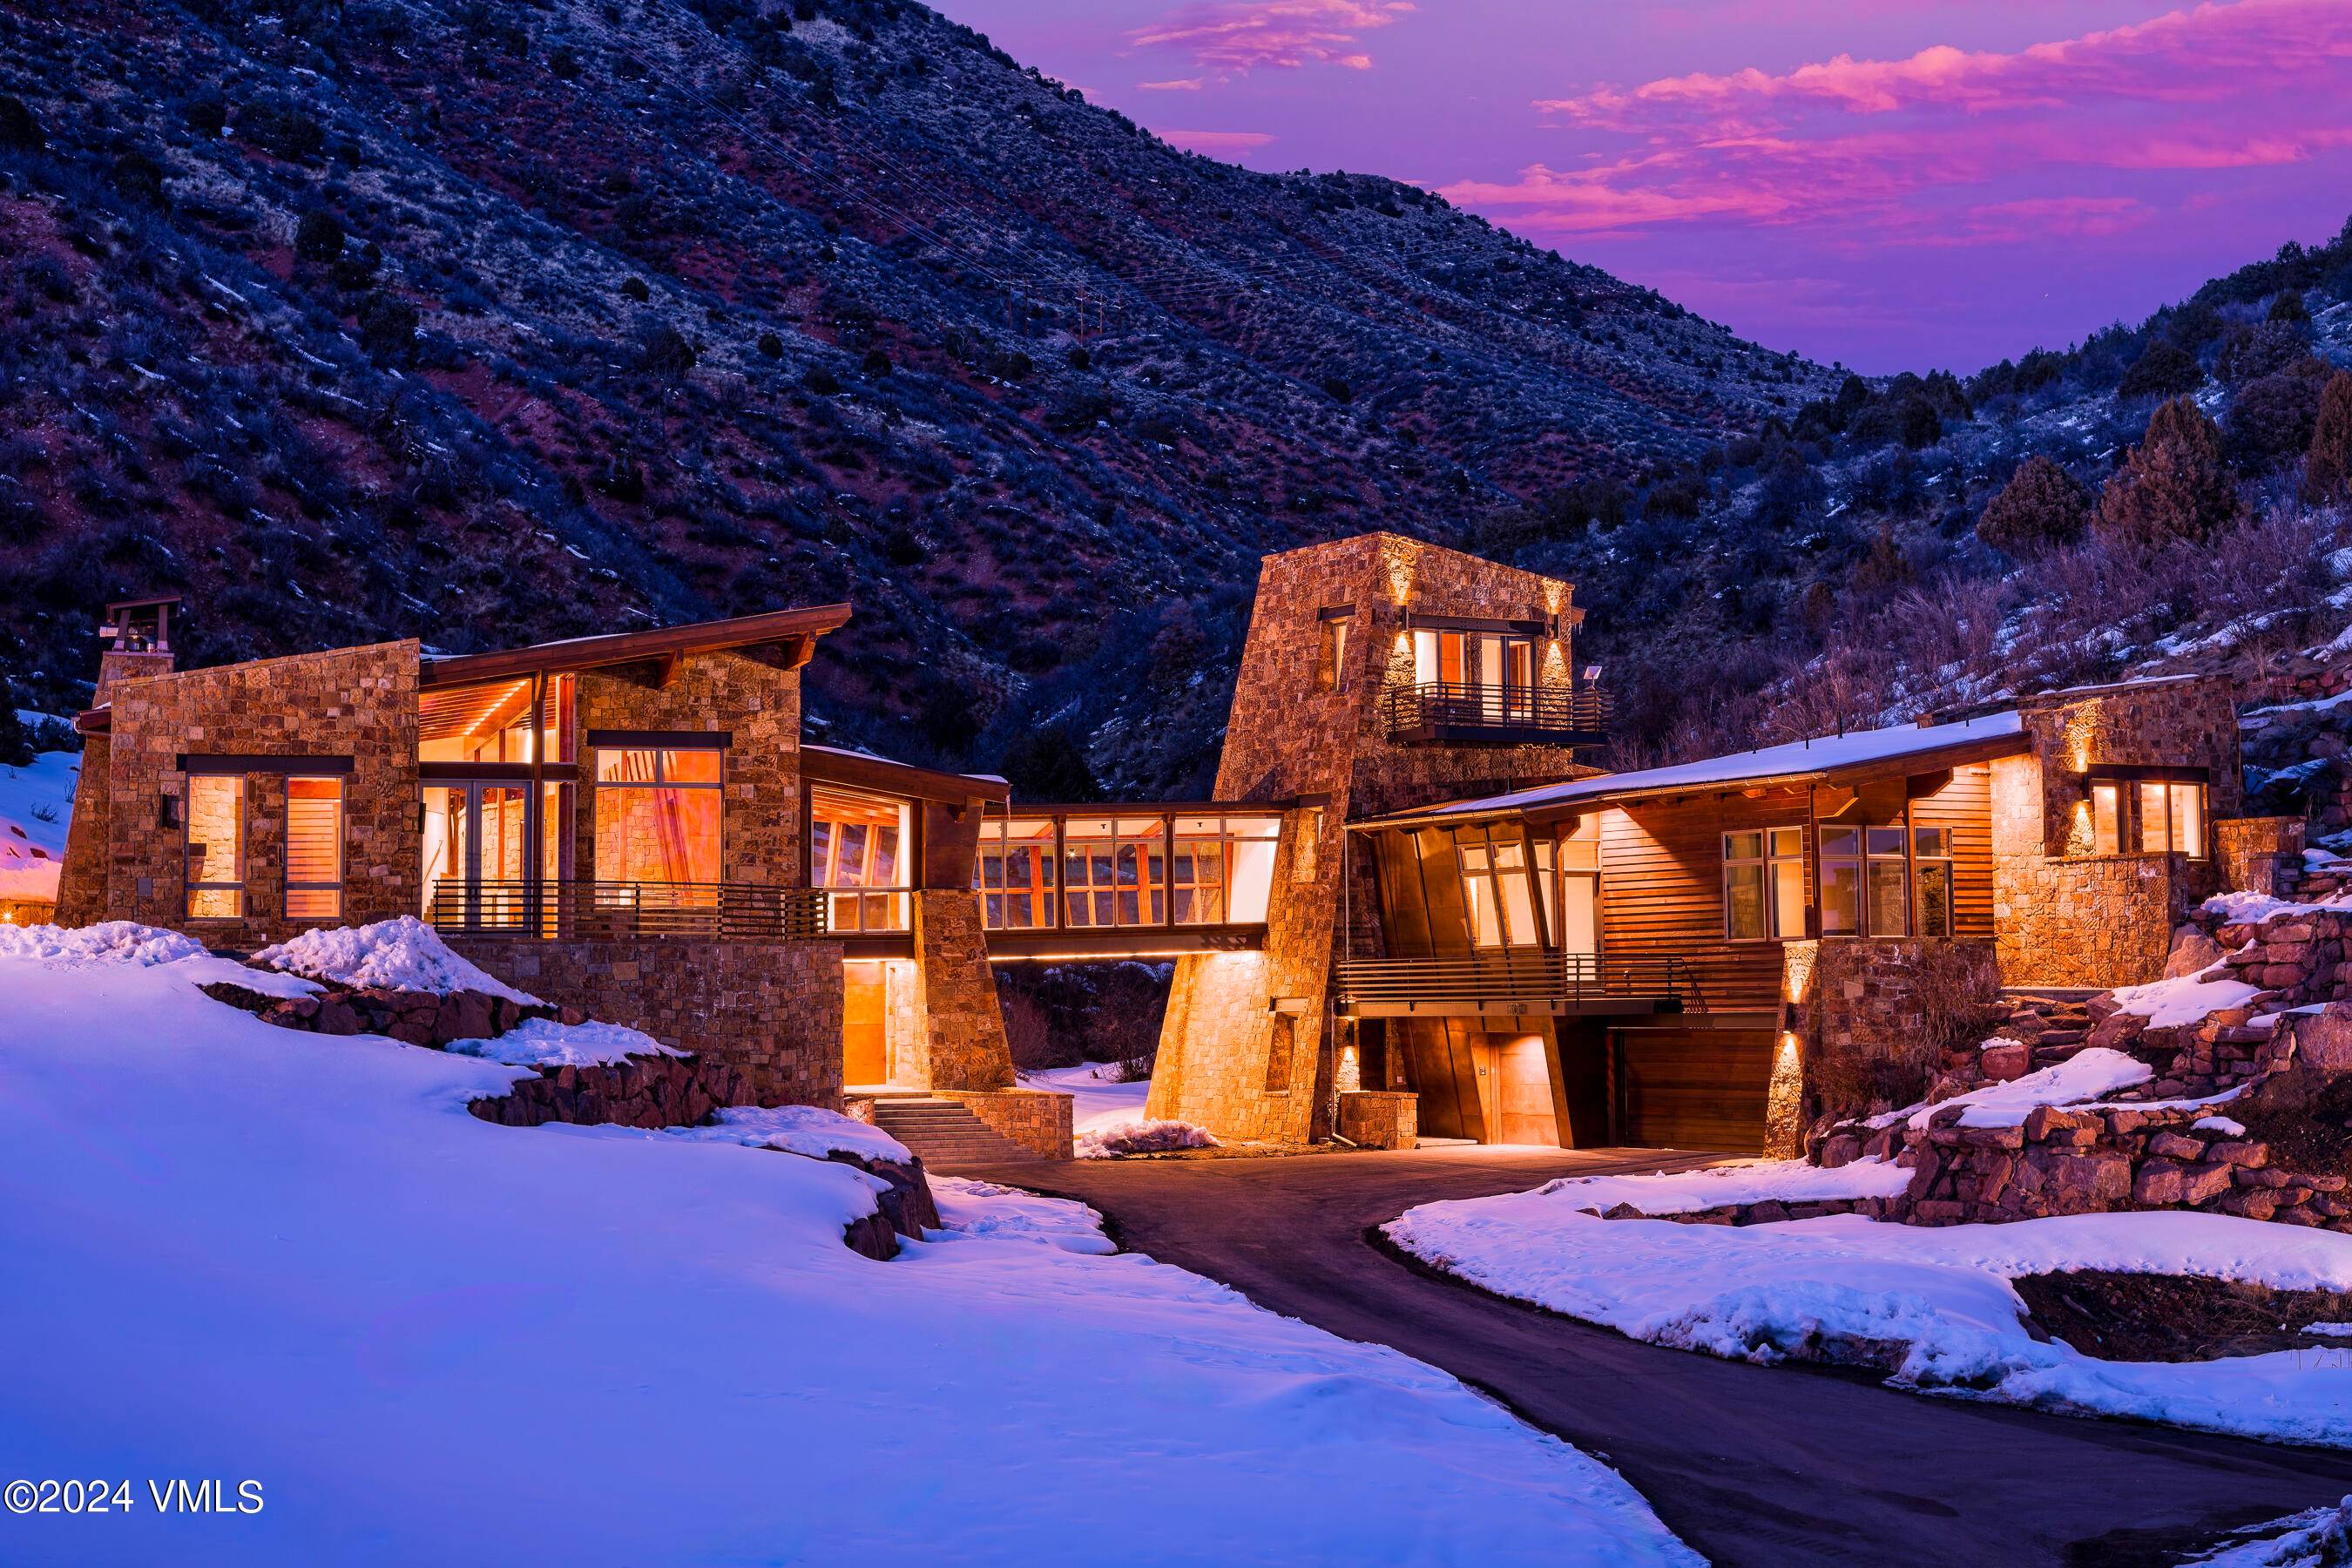 35 acre Red Canyon Creek Ranch meets modern luxury with endless outdoor recreation possibilities.